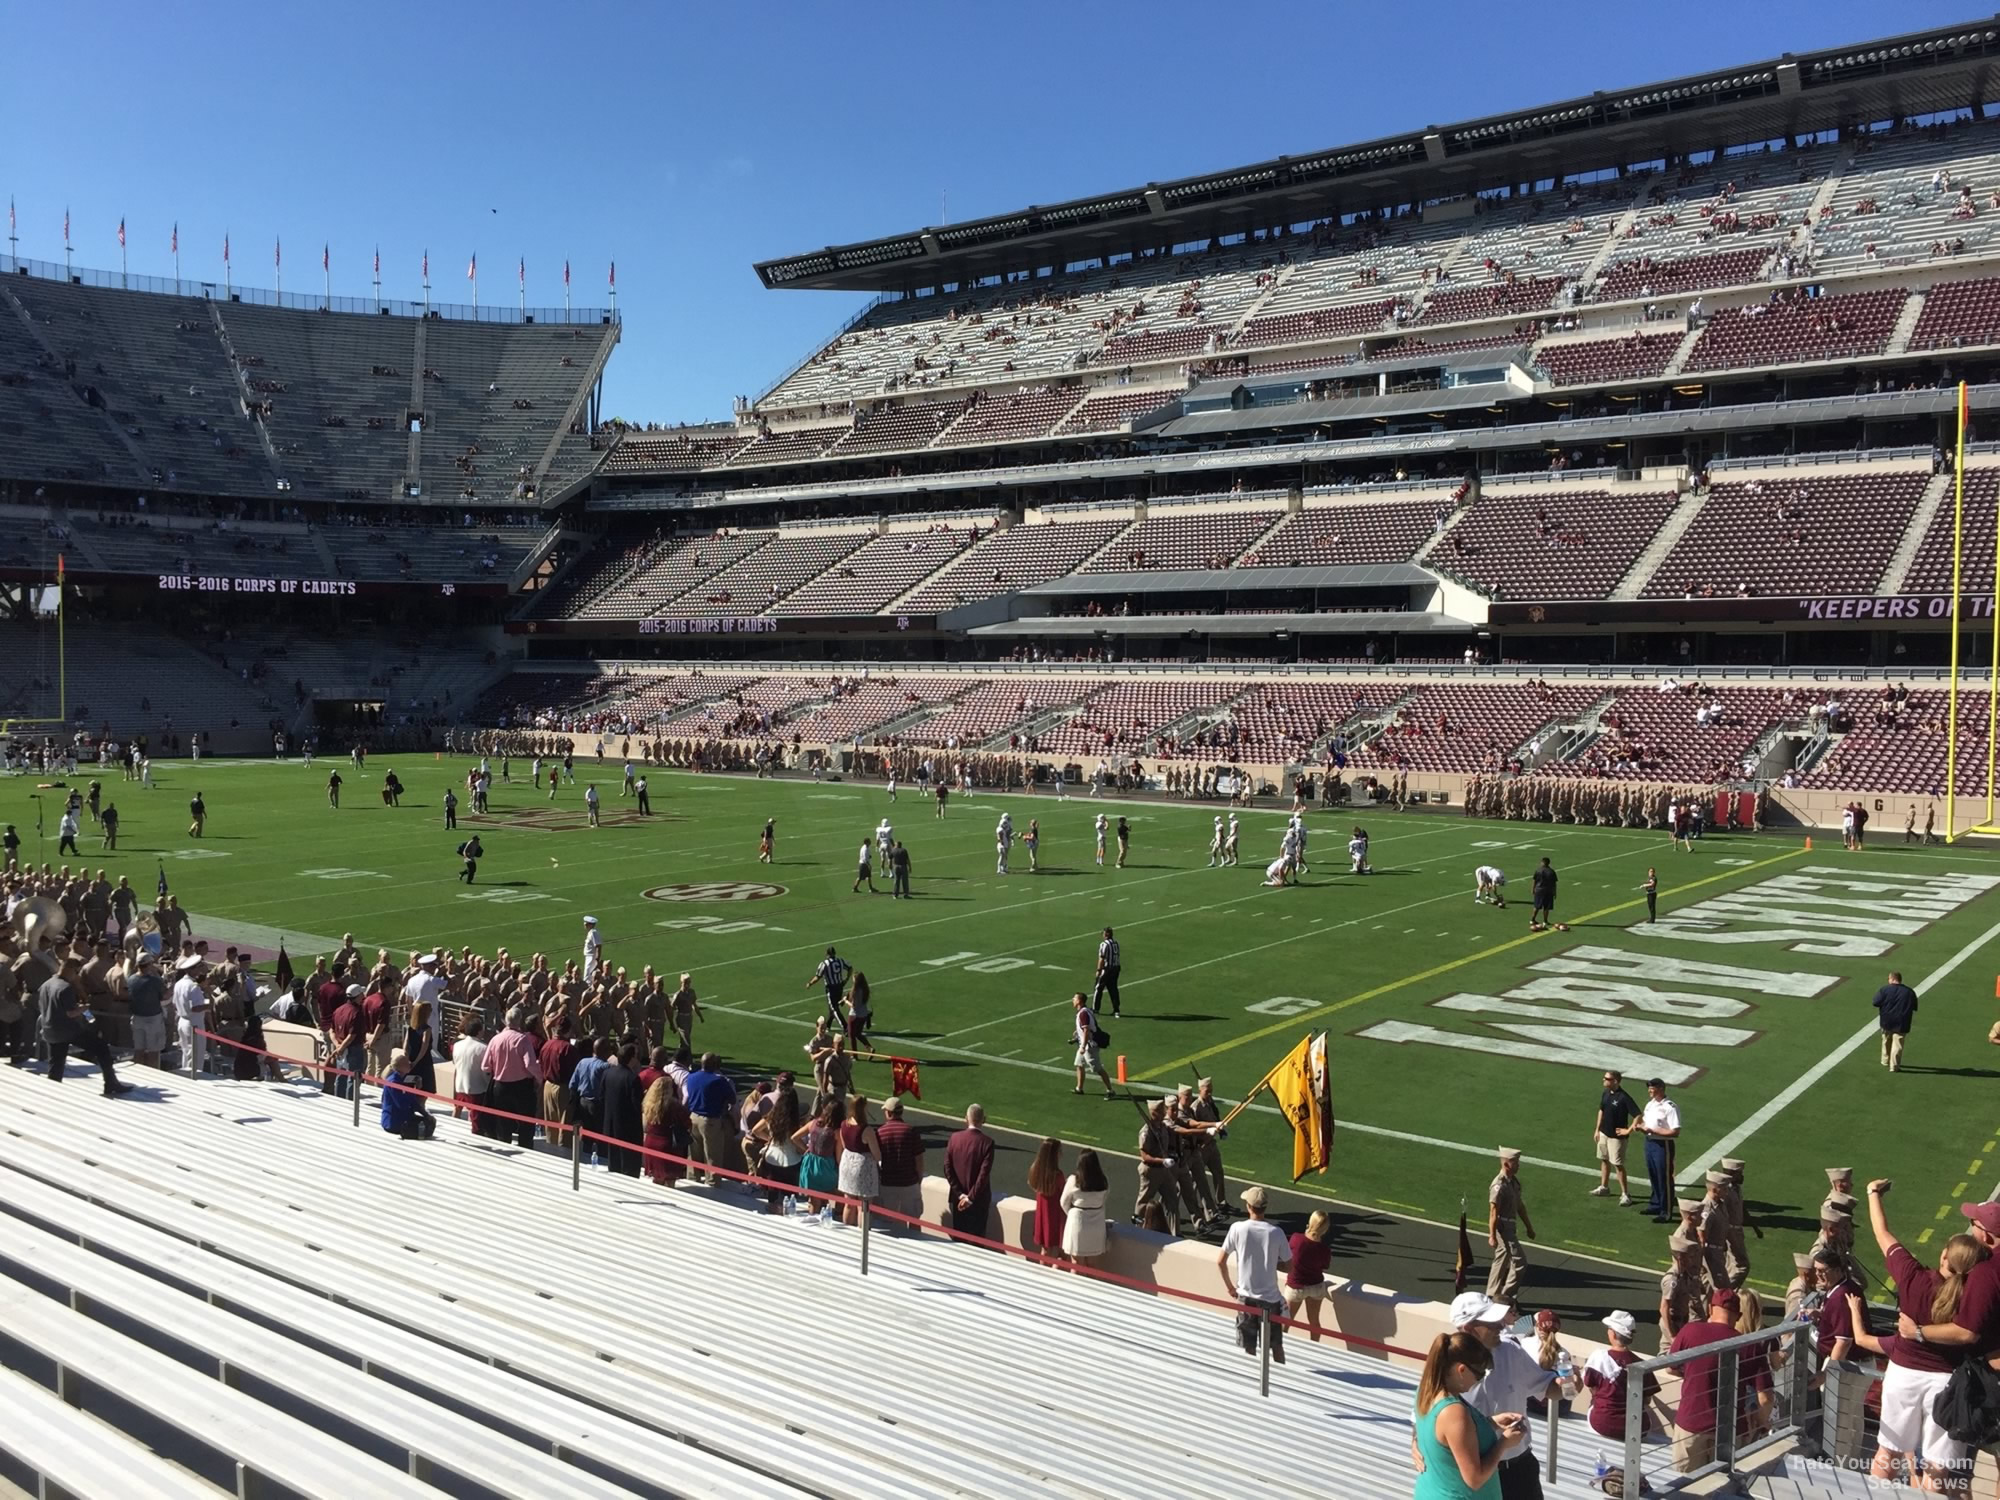 section 122, row 20 seat view  - kyle field